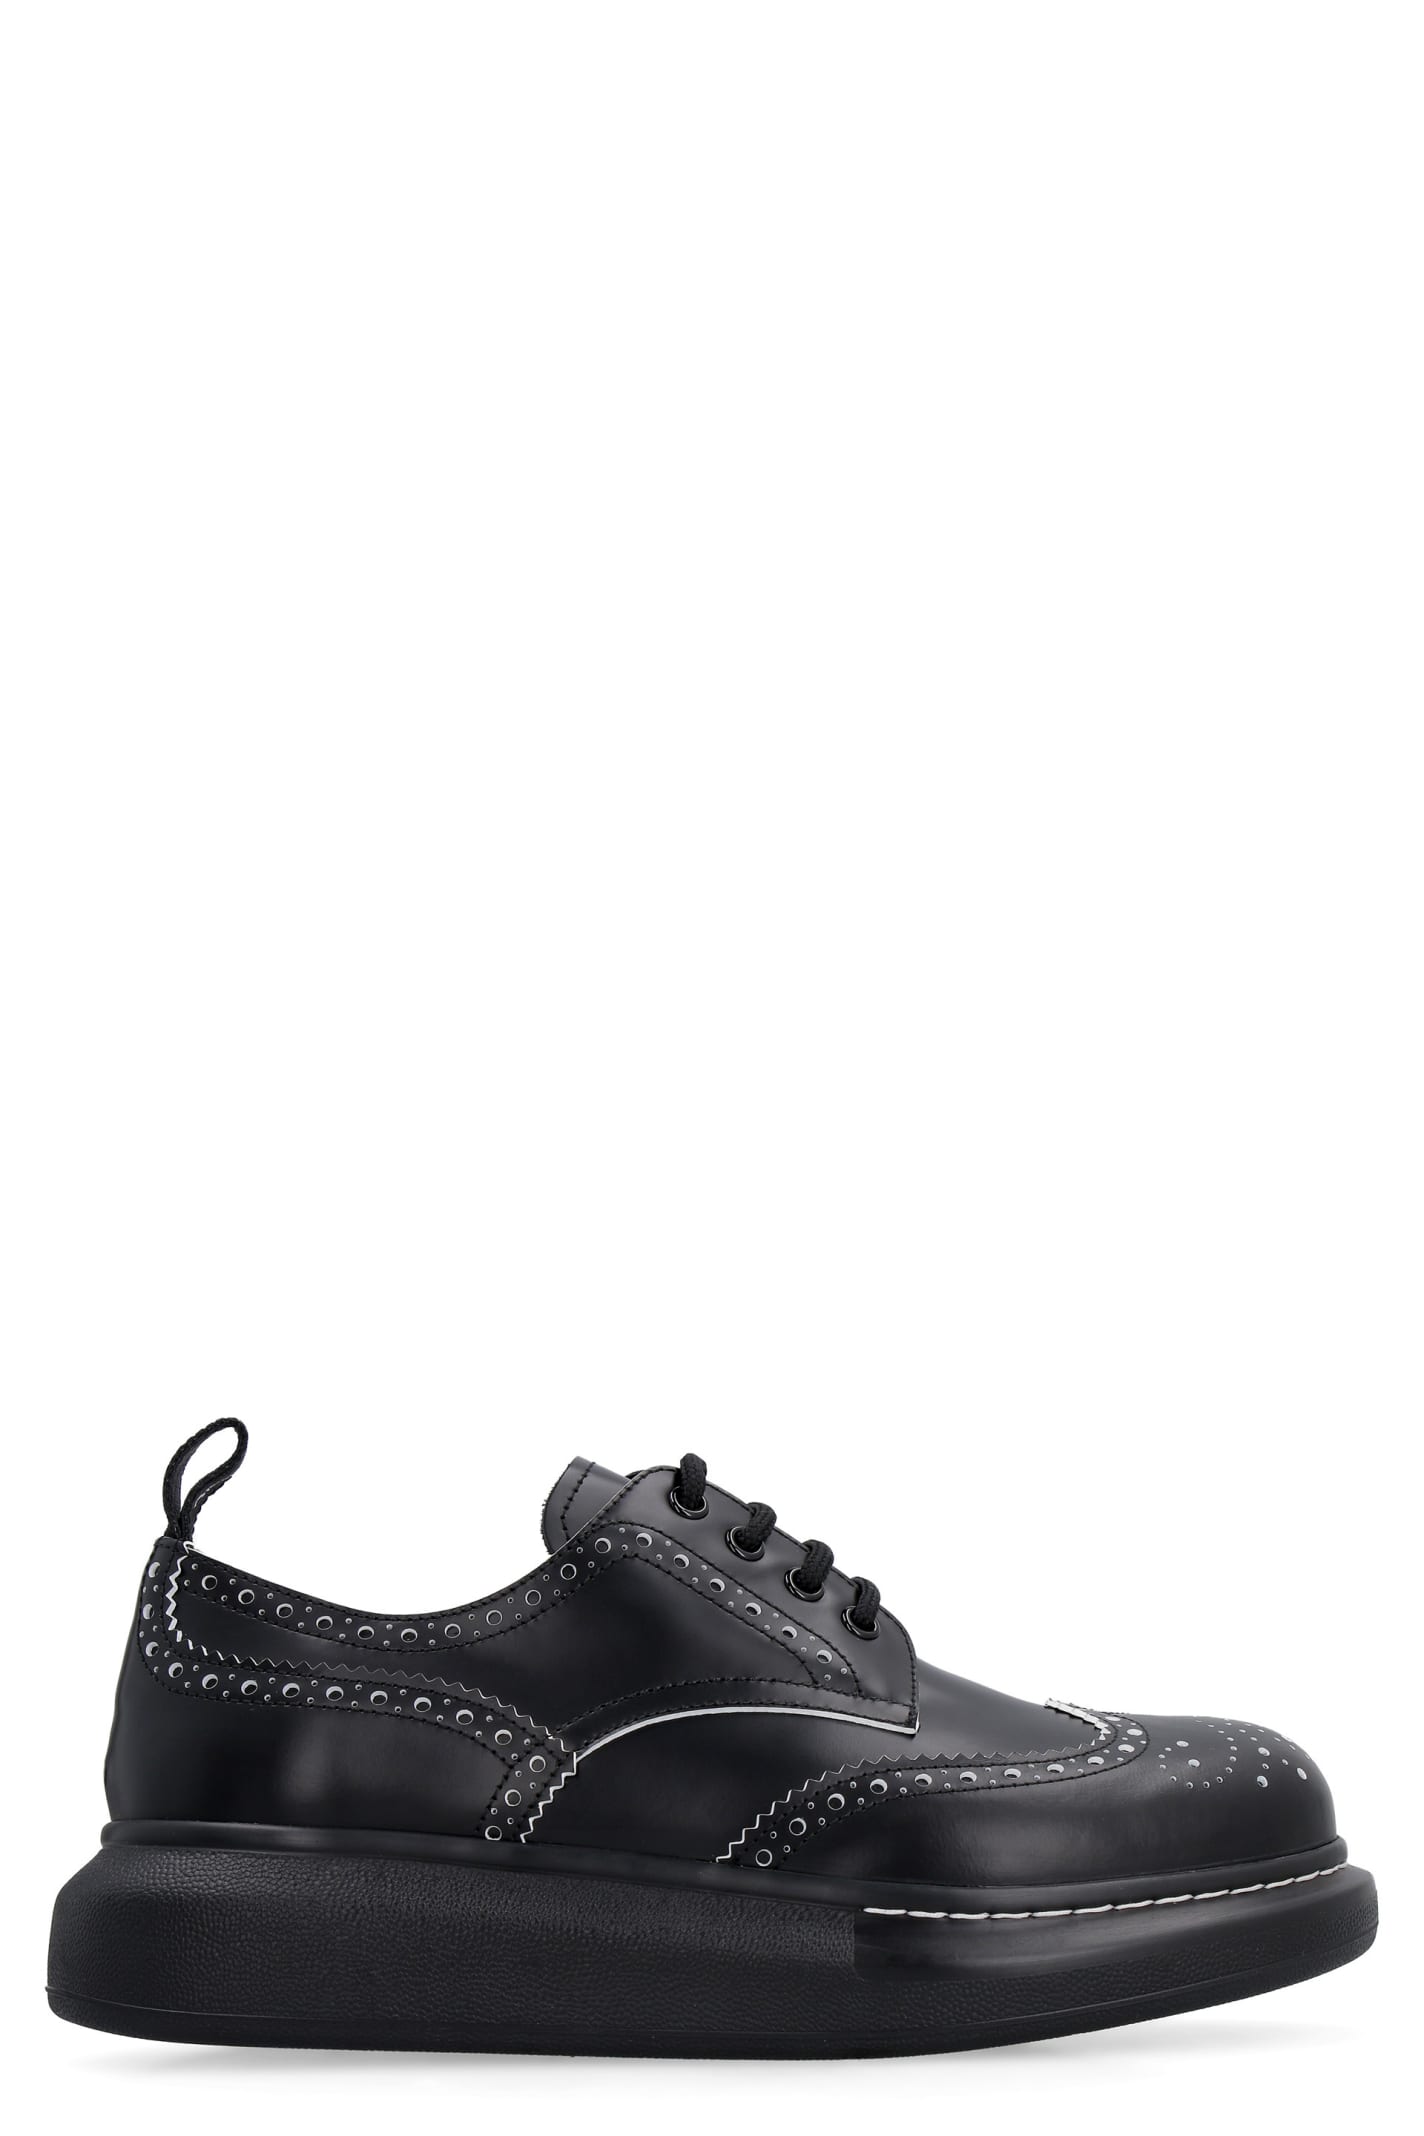 Alexander McQueen Hybrid Leather Lace-up Derby Shoes